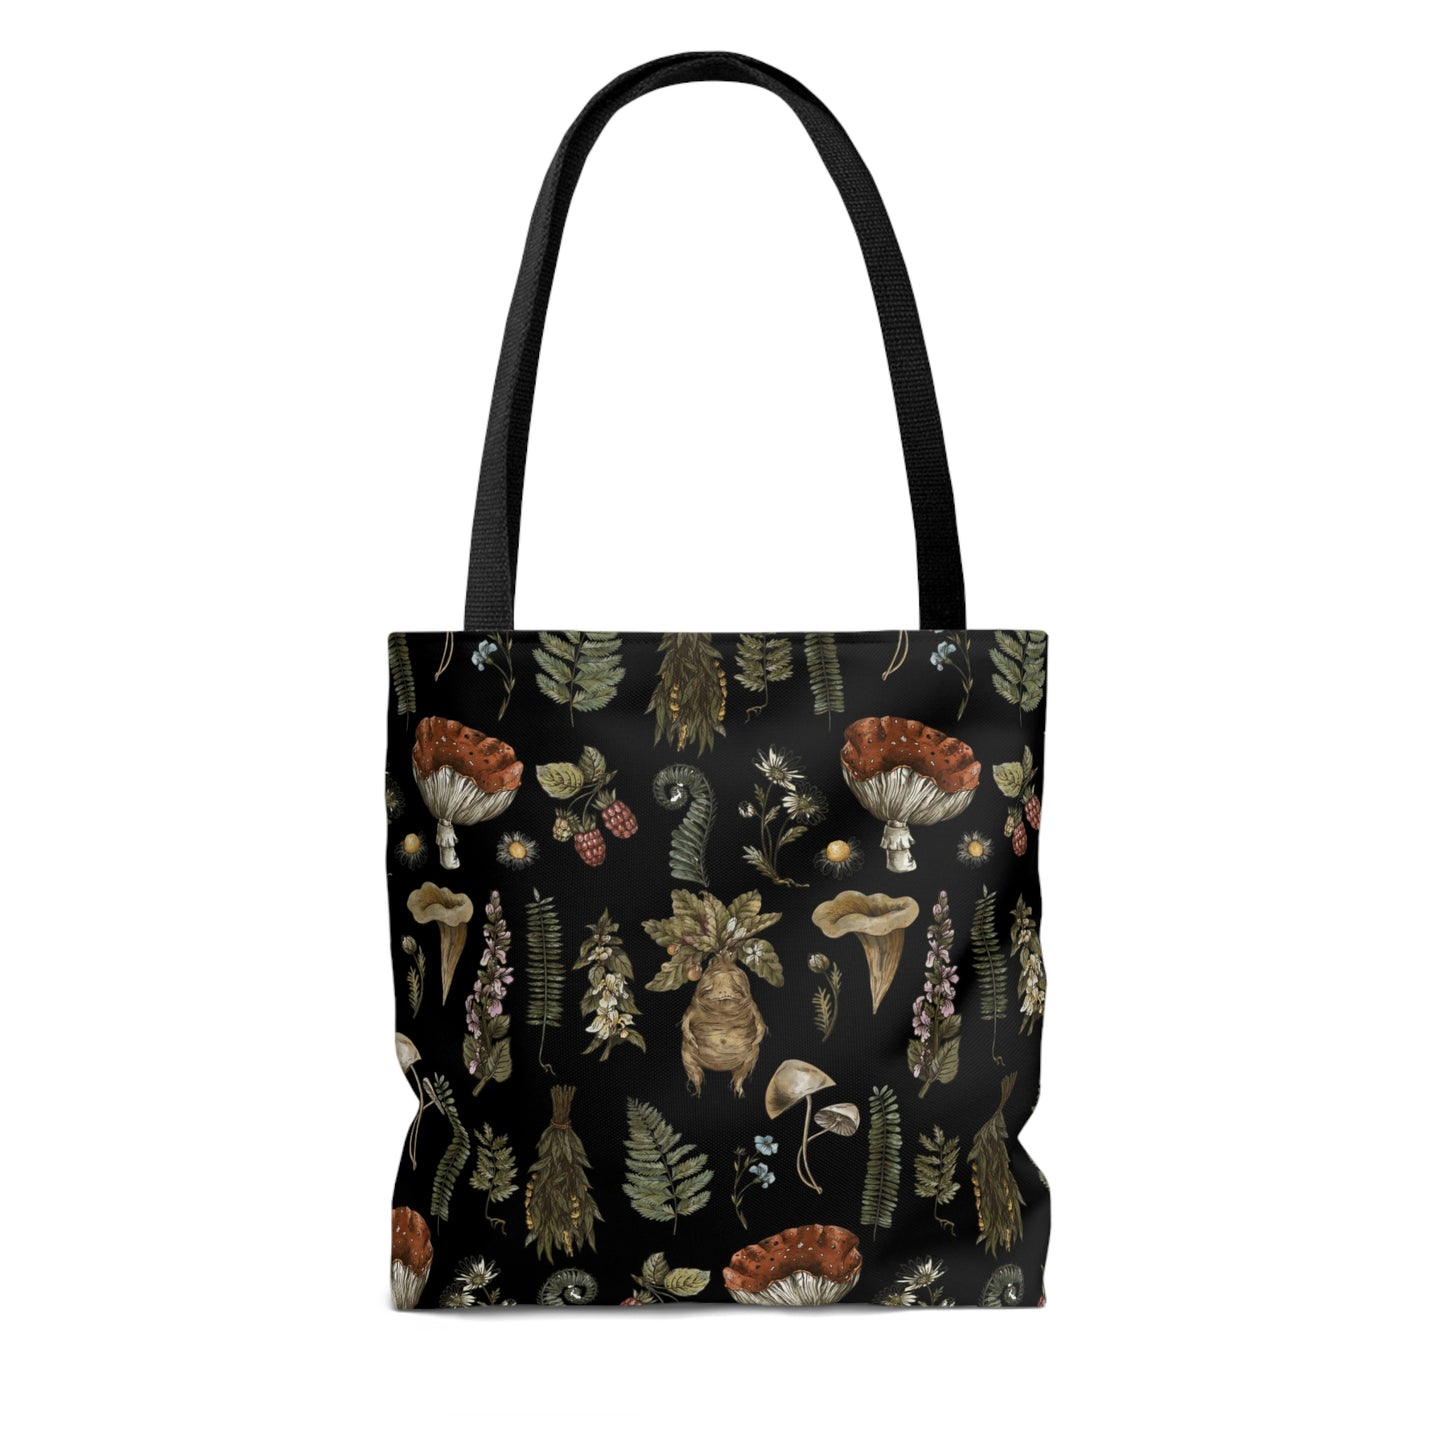 Dark cottagecore Tote Bag for plant witch, green witch or mushroom lover